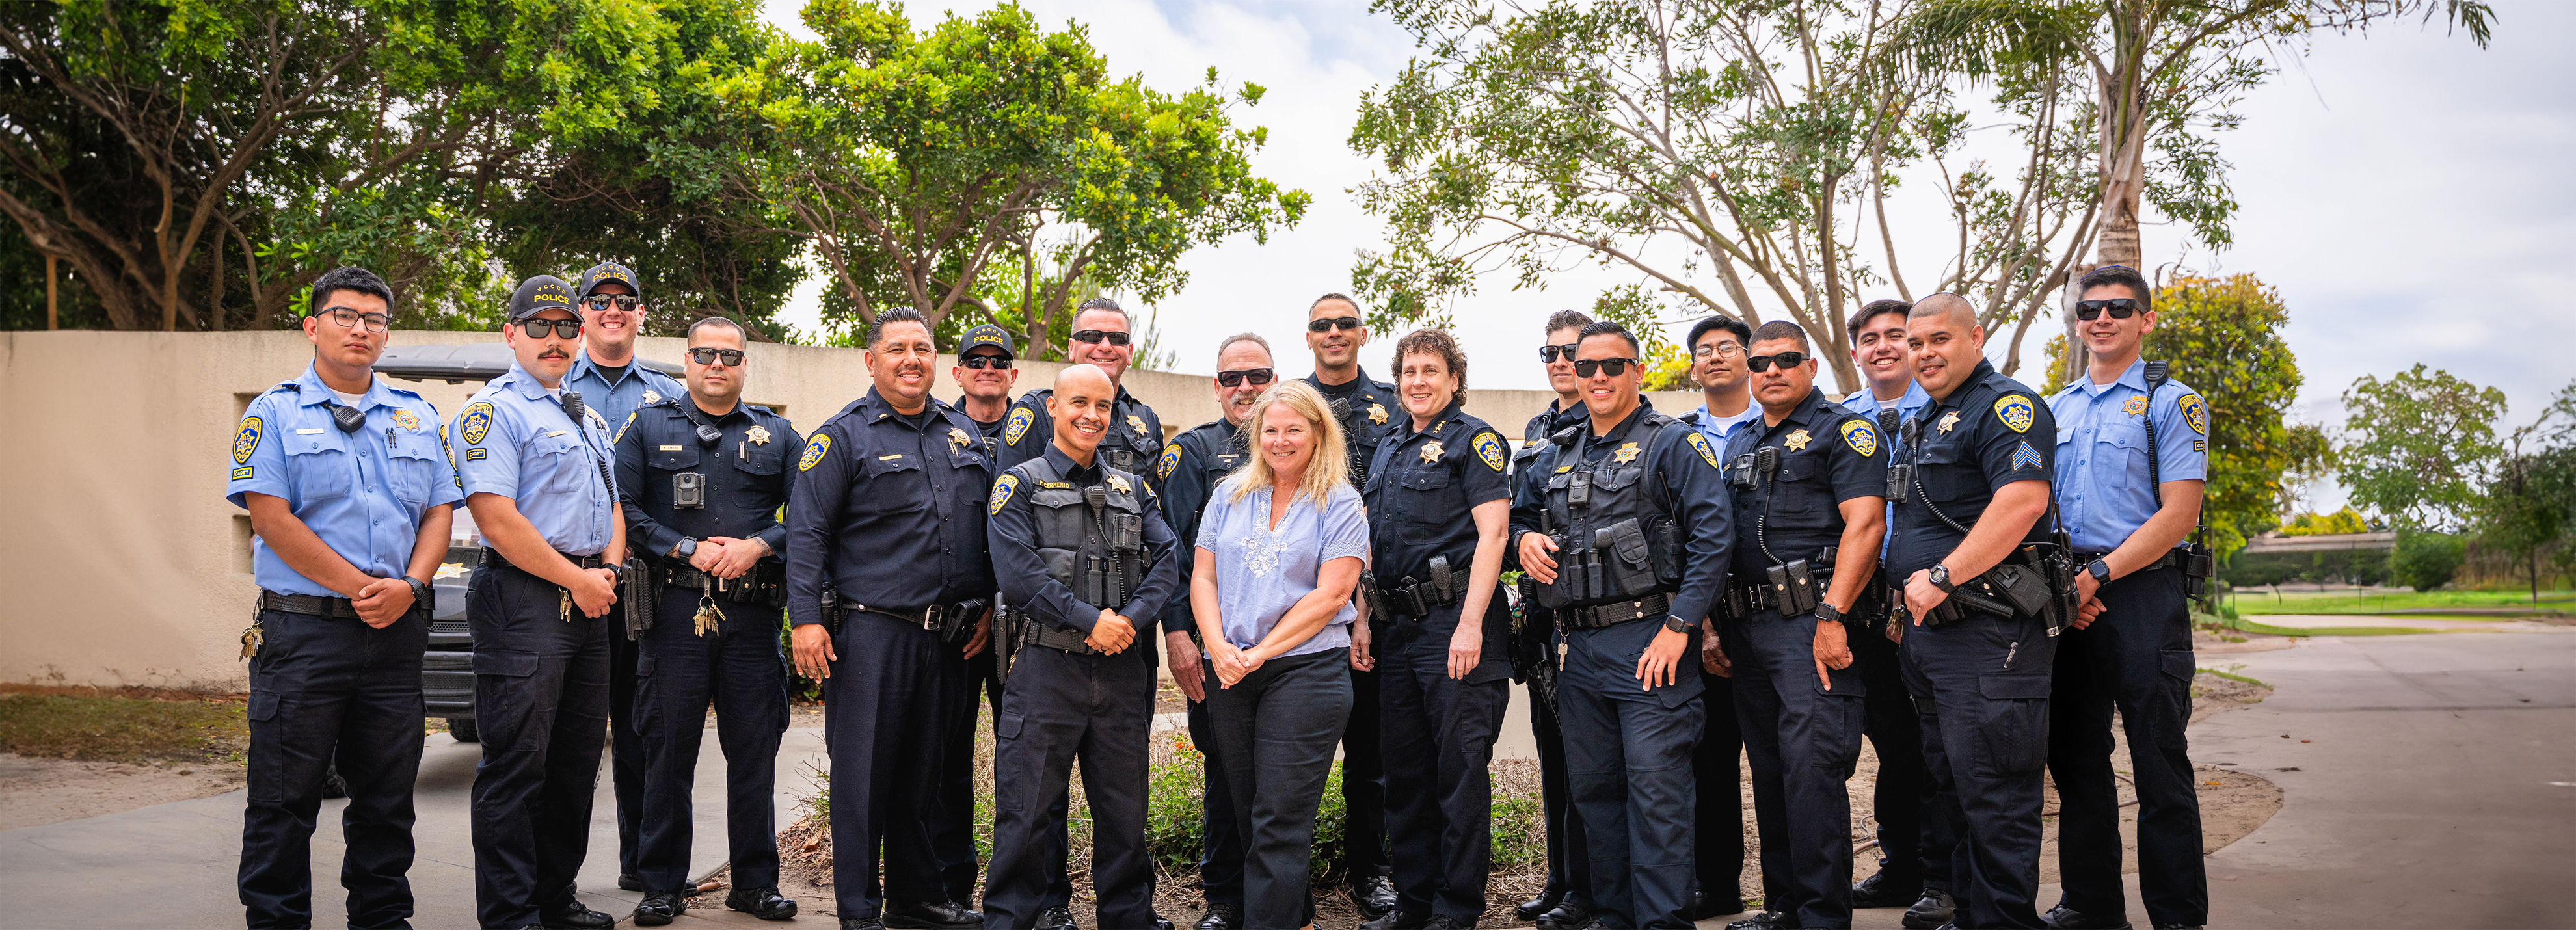 Group photo of VCCCD Police Department personnel, including police officers, safety officers, police cadets, and an administrative assistant.